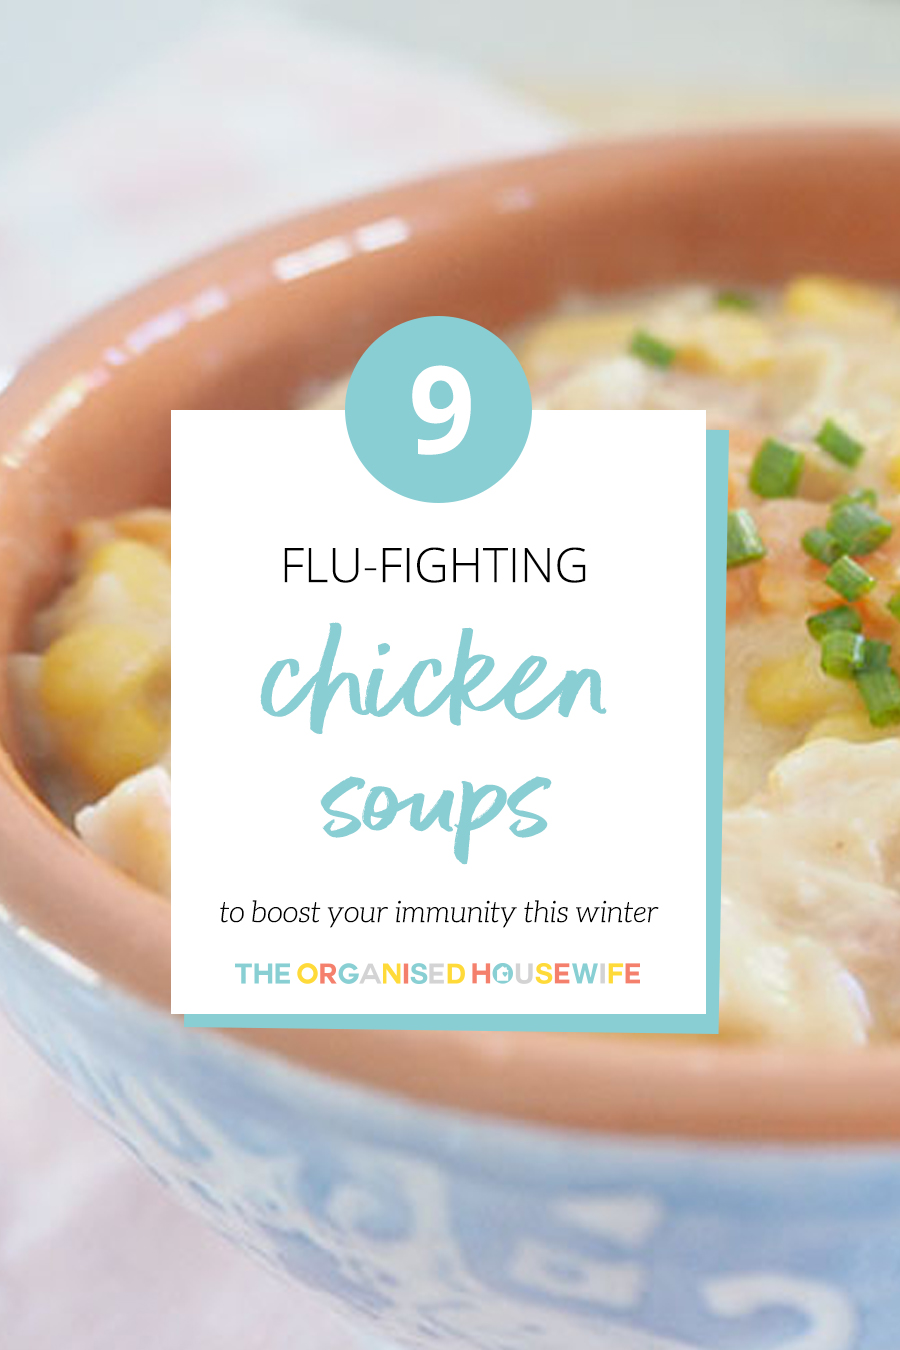 9 Flu-Fighting Chicken Soup Recipes - The Organised Housewife